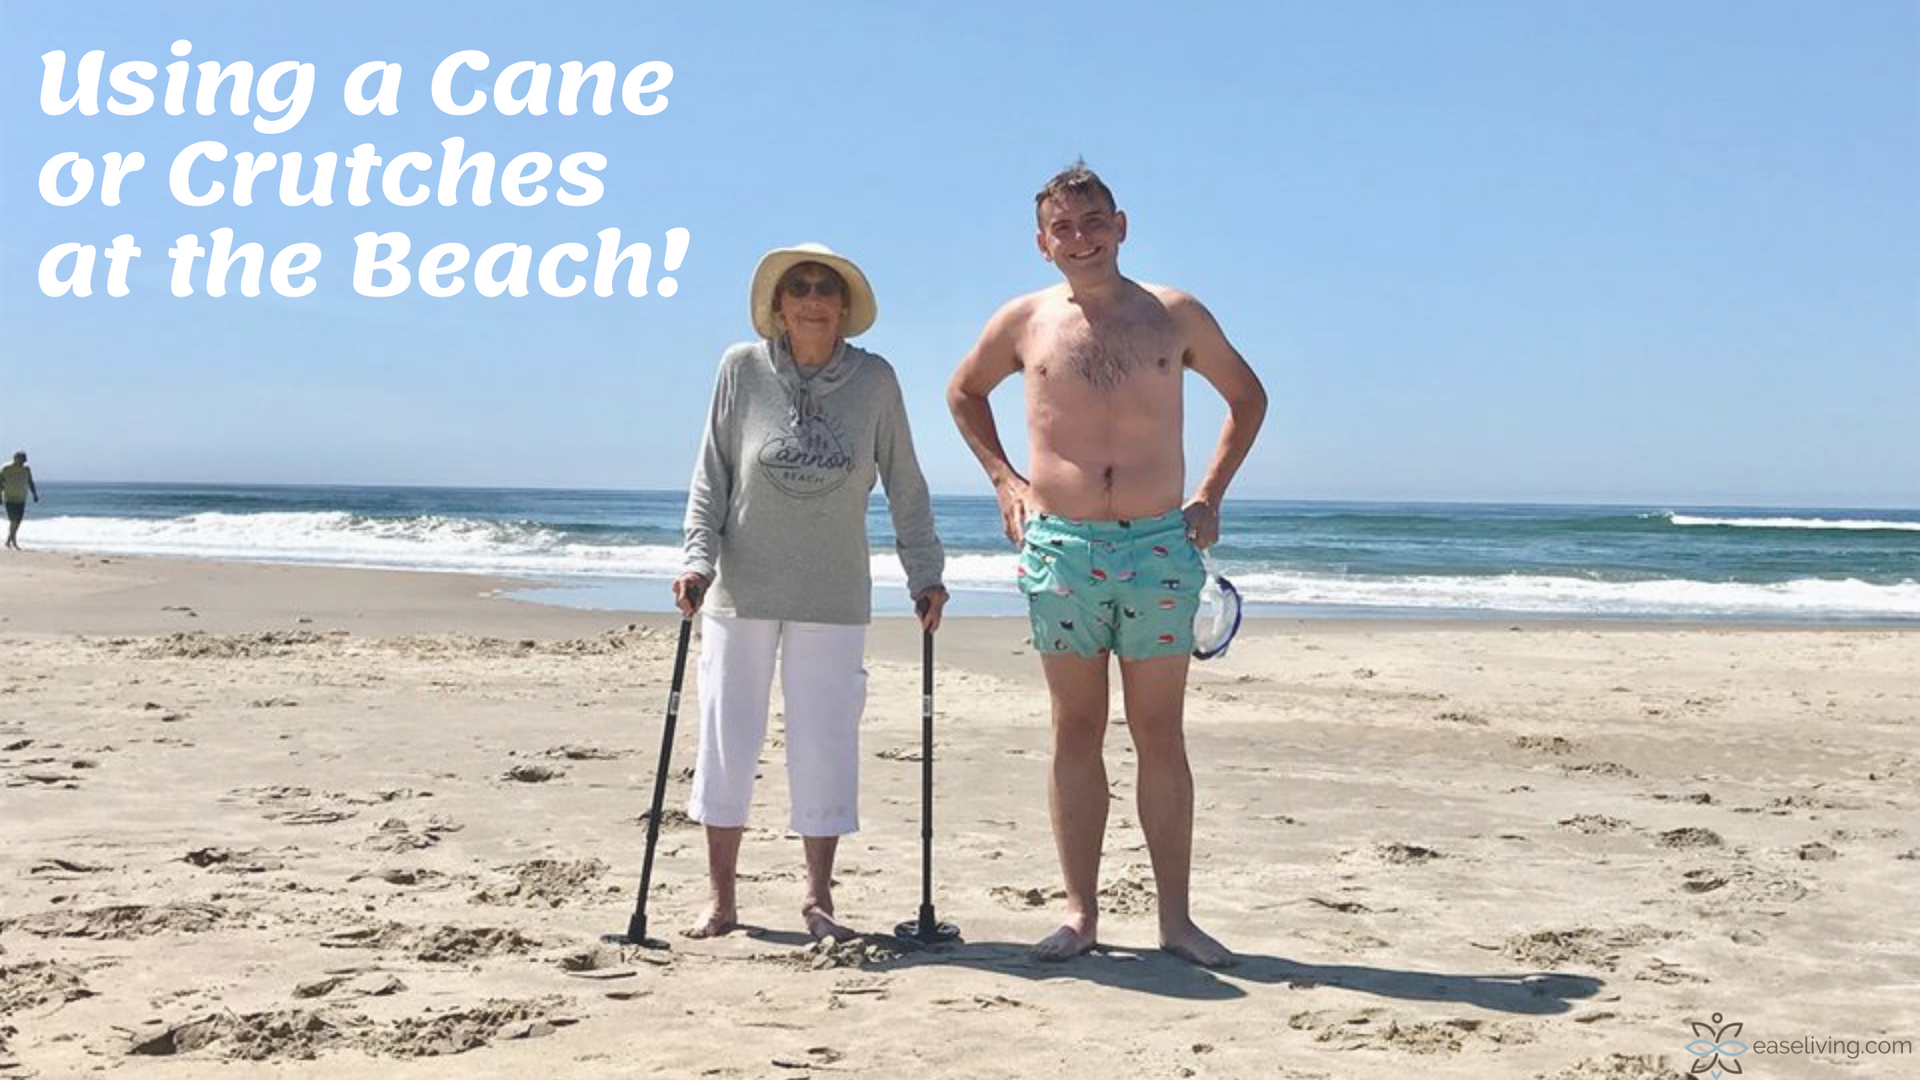 How to Use a Cane or Crutches at the Beach